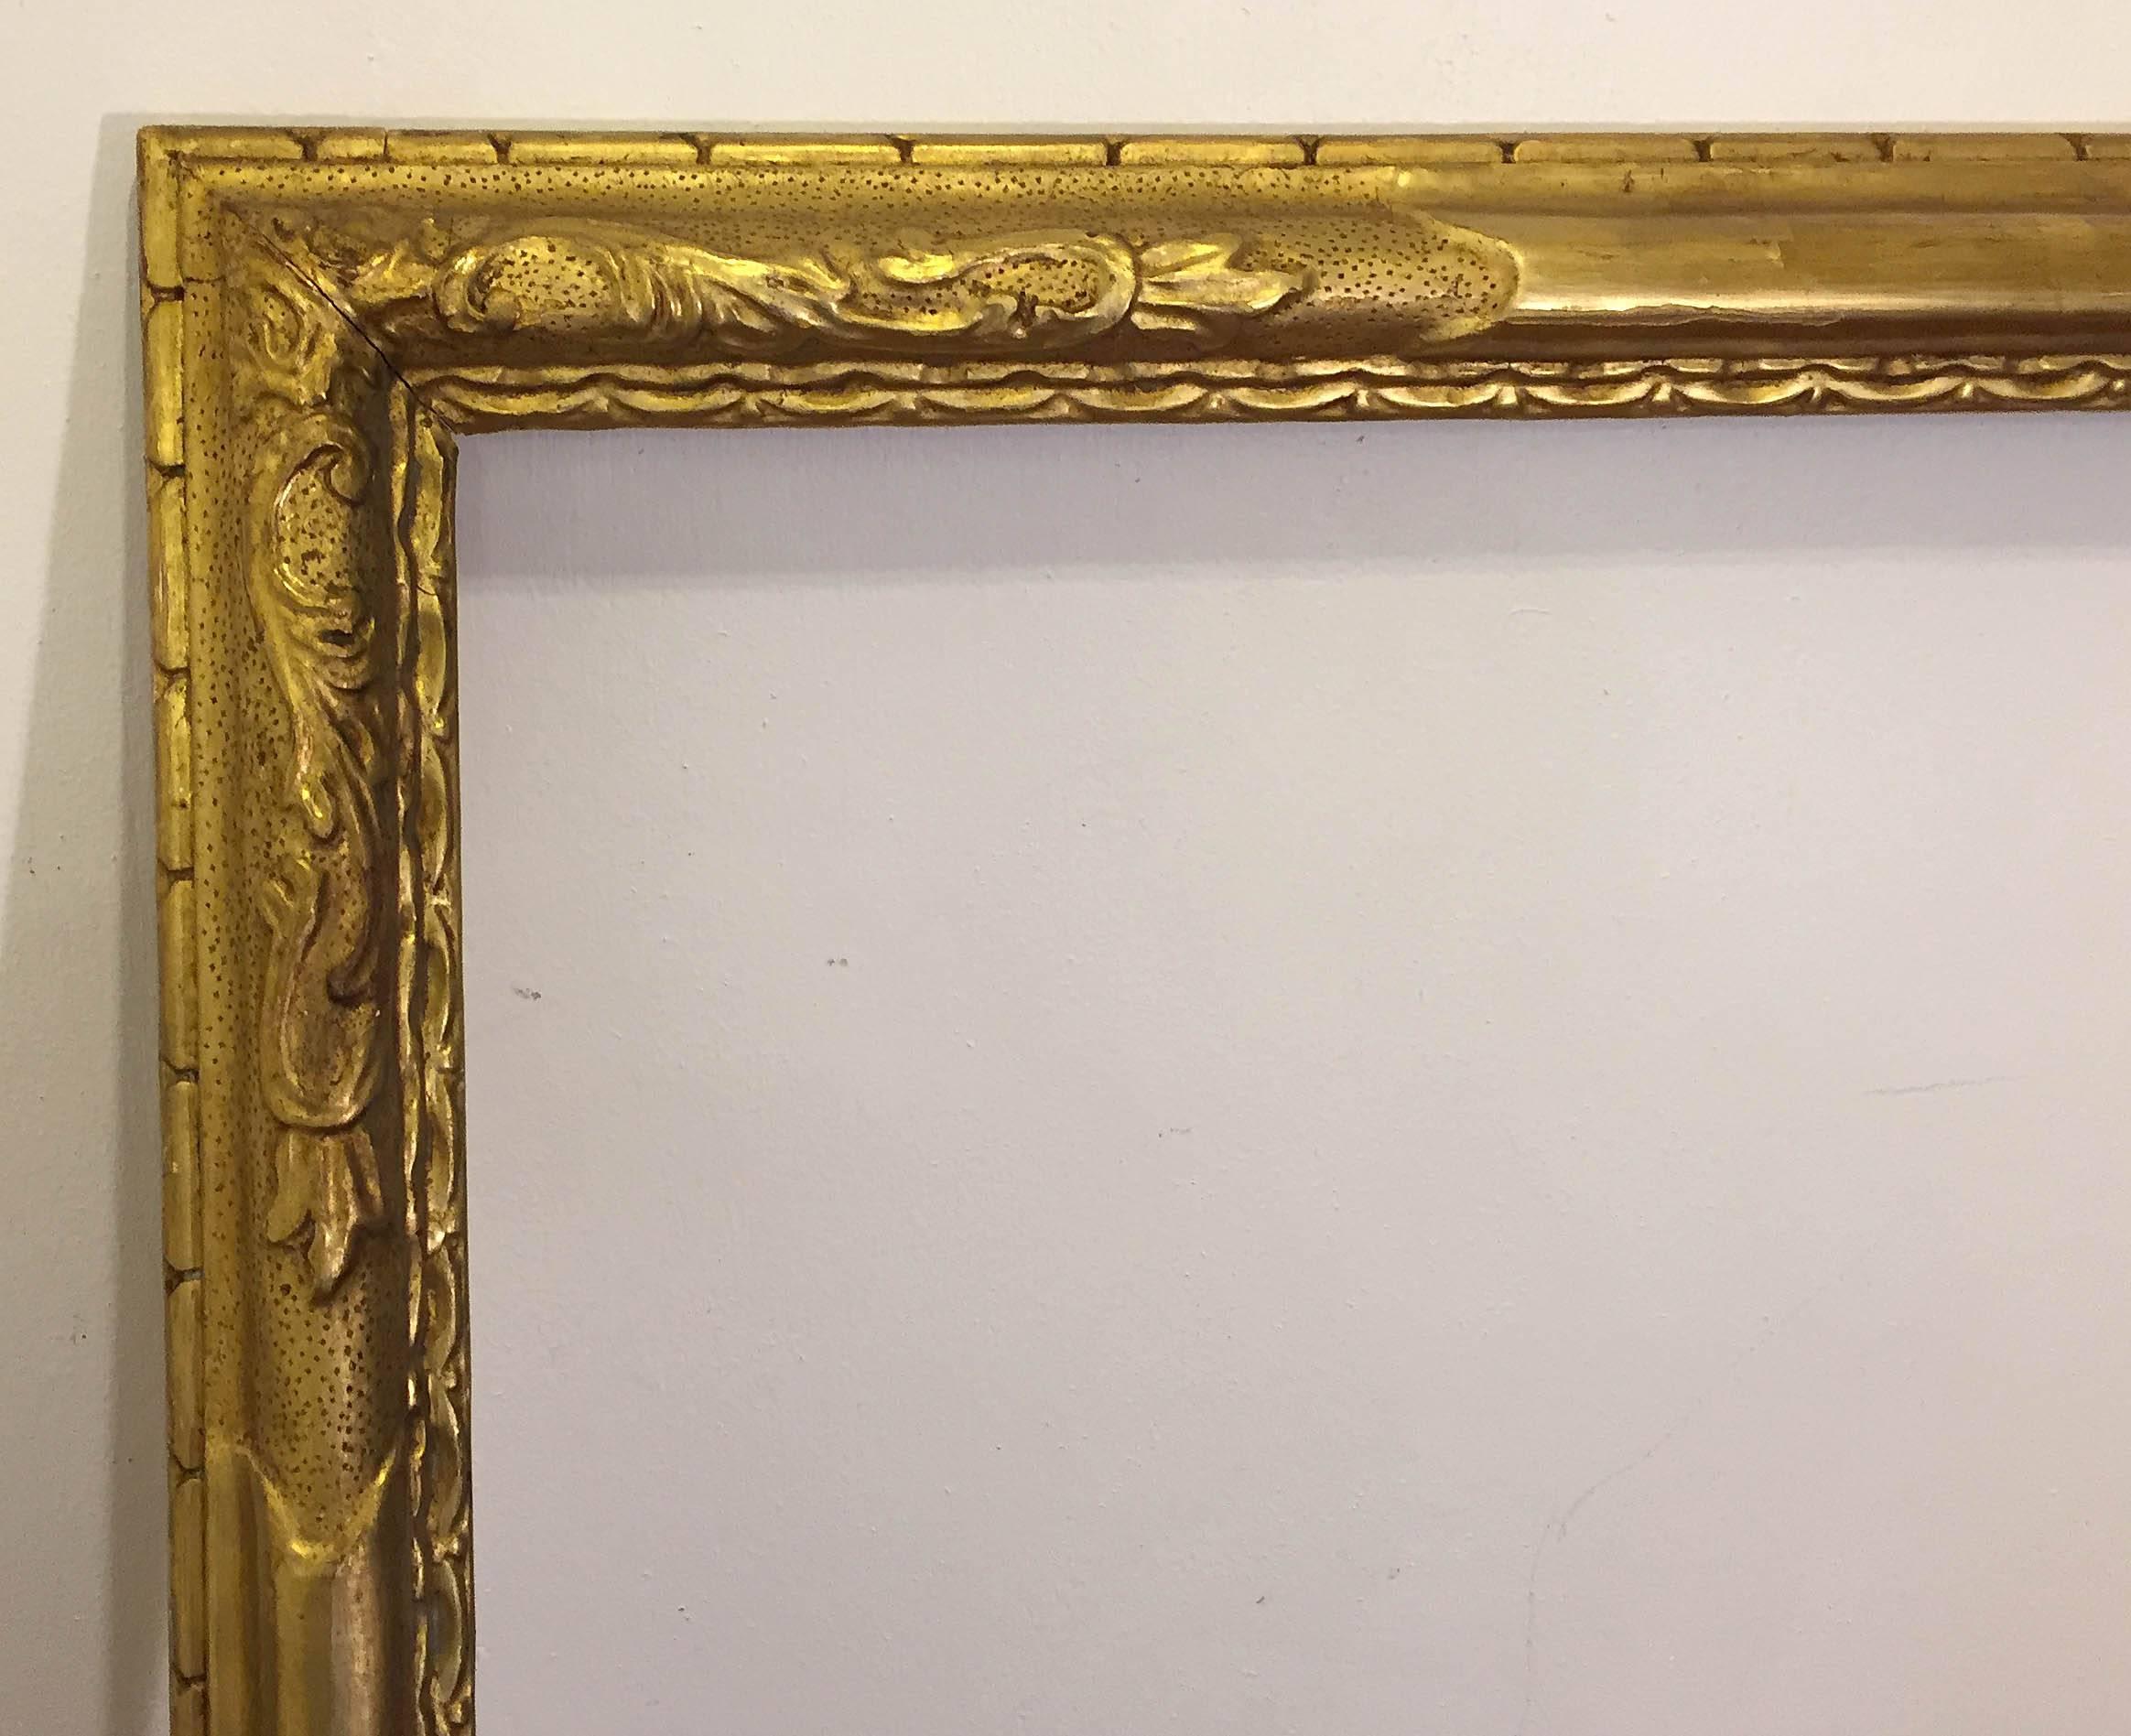 Arts and crafts carved and gold leafed frame by Brandywine frame maker Francis Coll. Signed "F. Coll". Dated 1925. Coll, a frame maker who worked in Wilmington, Delaware, was the subject of a significant exhibition of his carvings at the